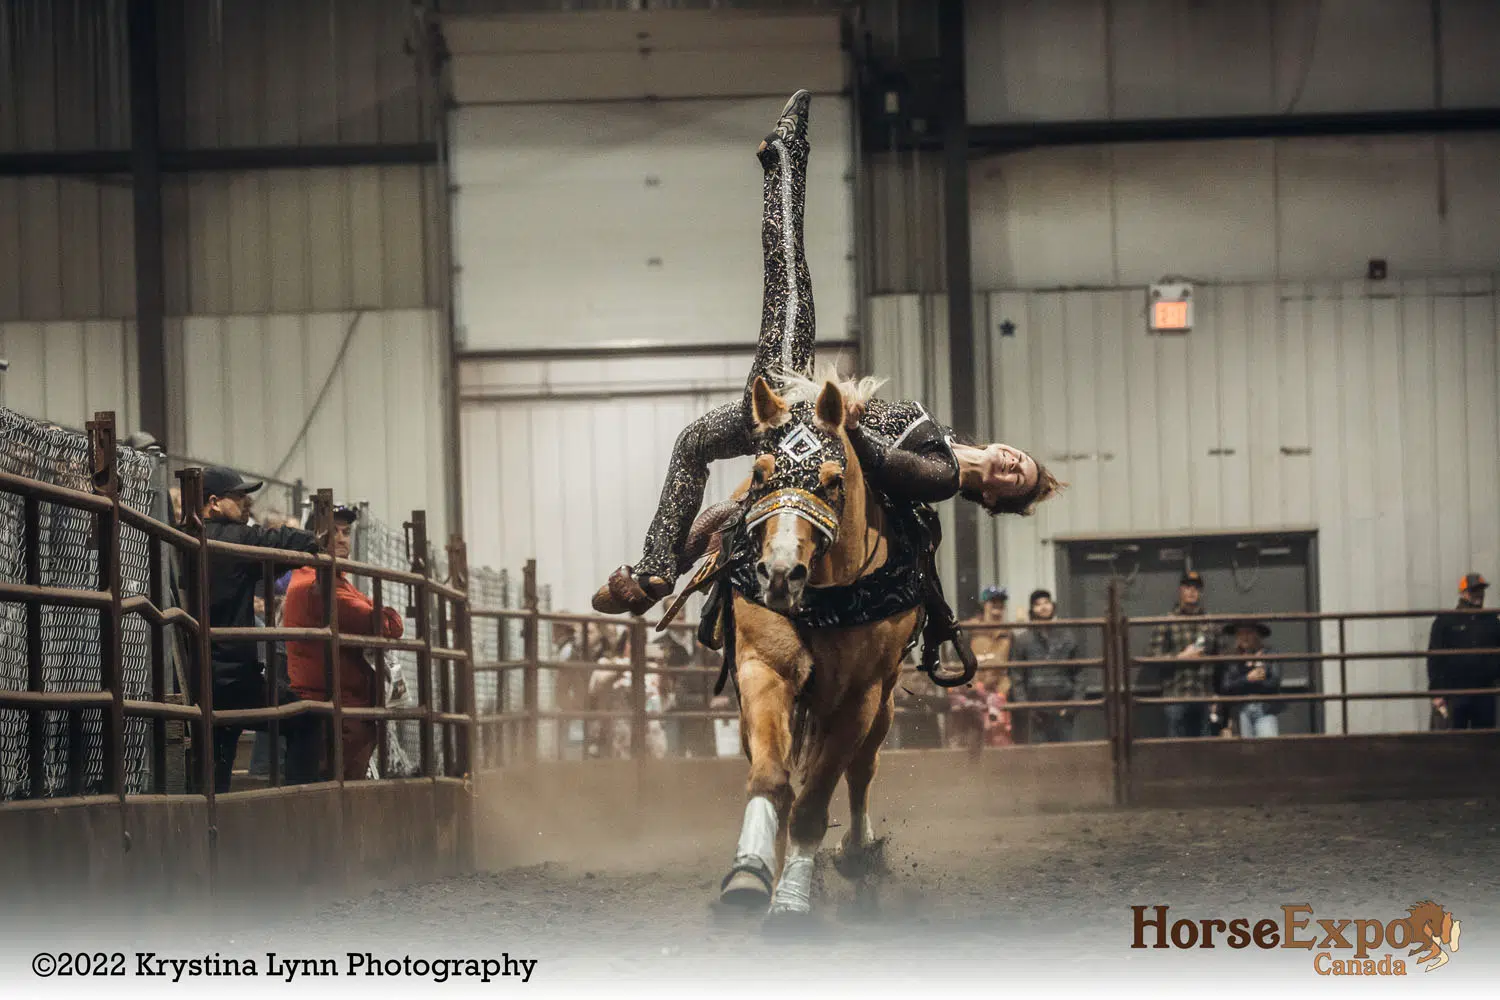 Horse Expo Canada’s second visit to Red Deer begins Friday